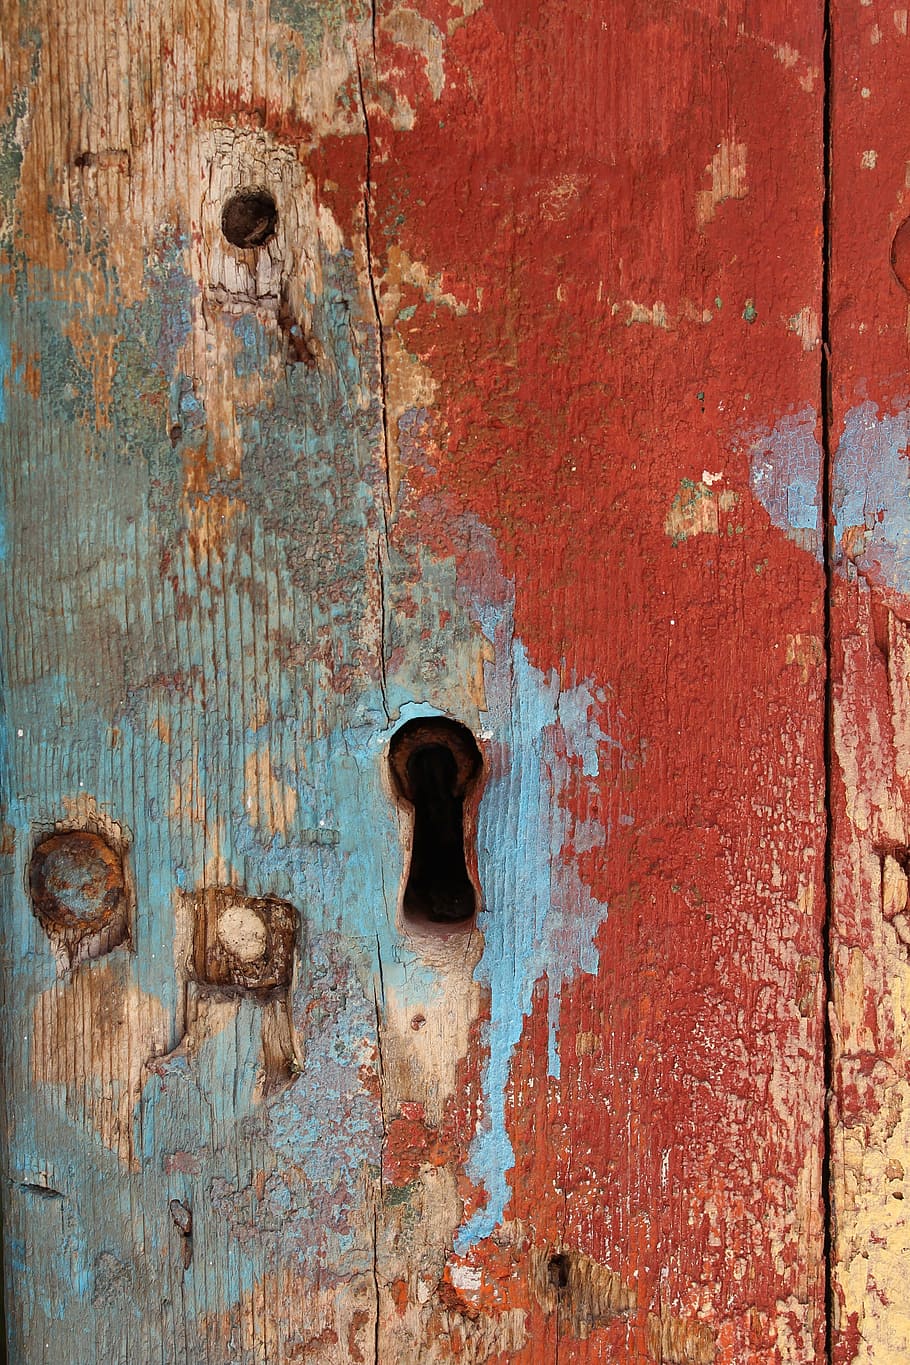 keyhole, paint, grunge, distressed, wood, texture, wood - Material, old, backgrounds, door